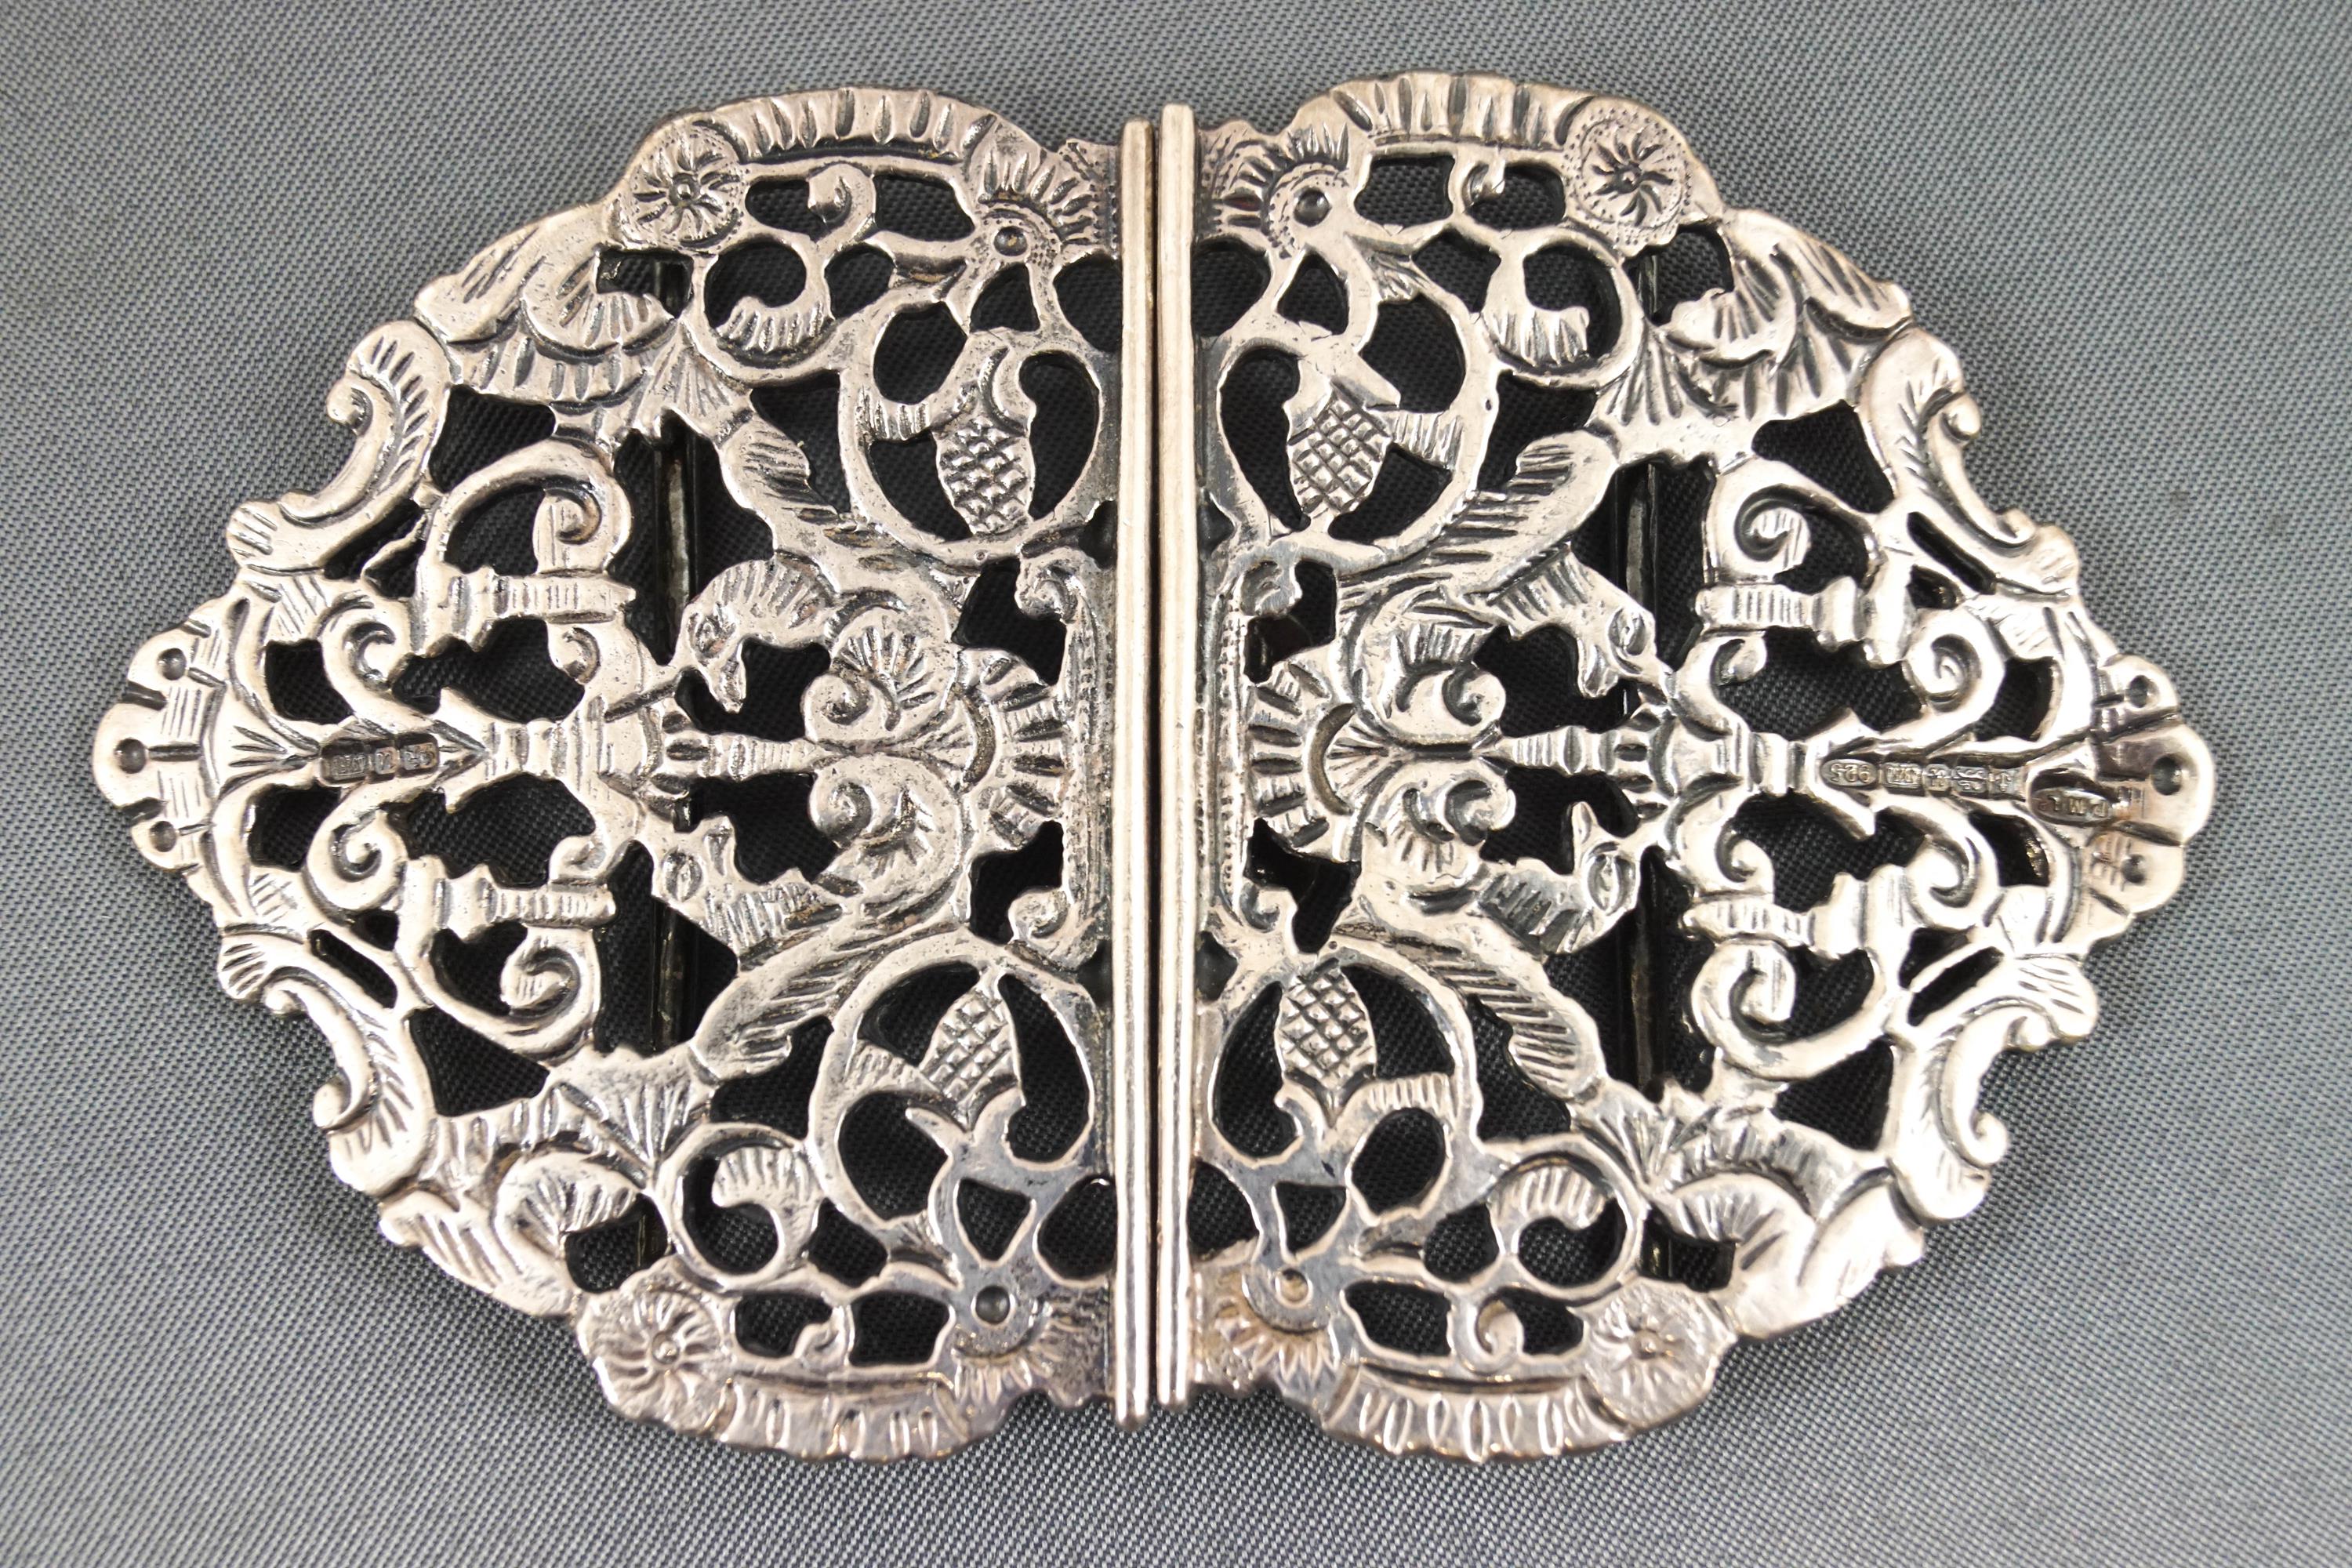 A cast and chased silver openwork belt buckle in the scrolling foliate baroque style, Chester 1894, - Image 3 of 3